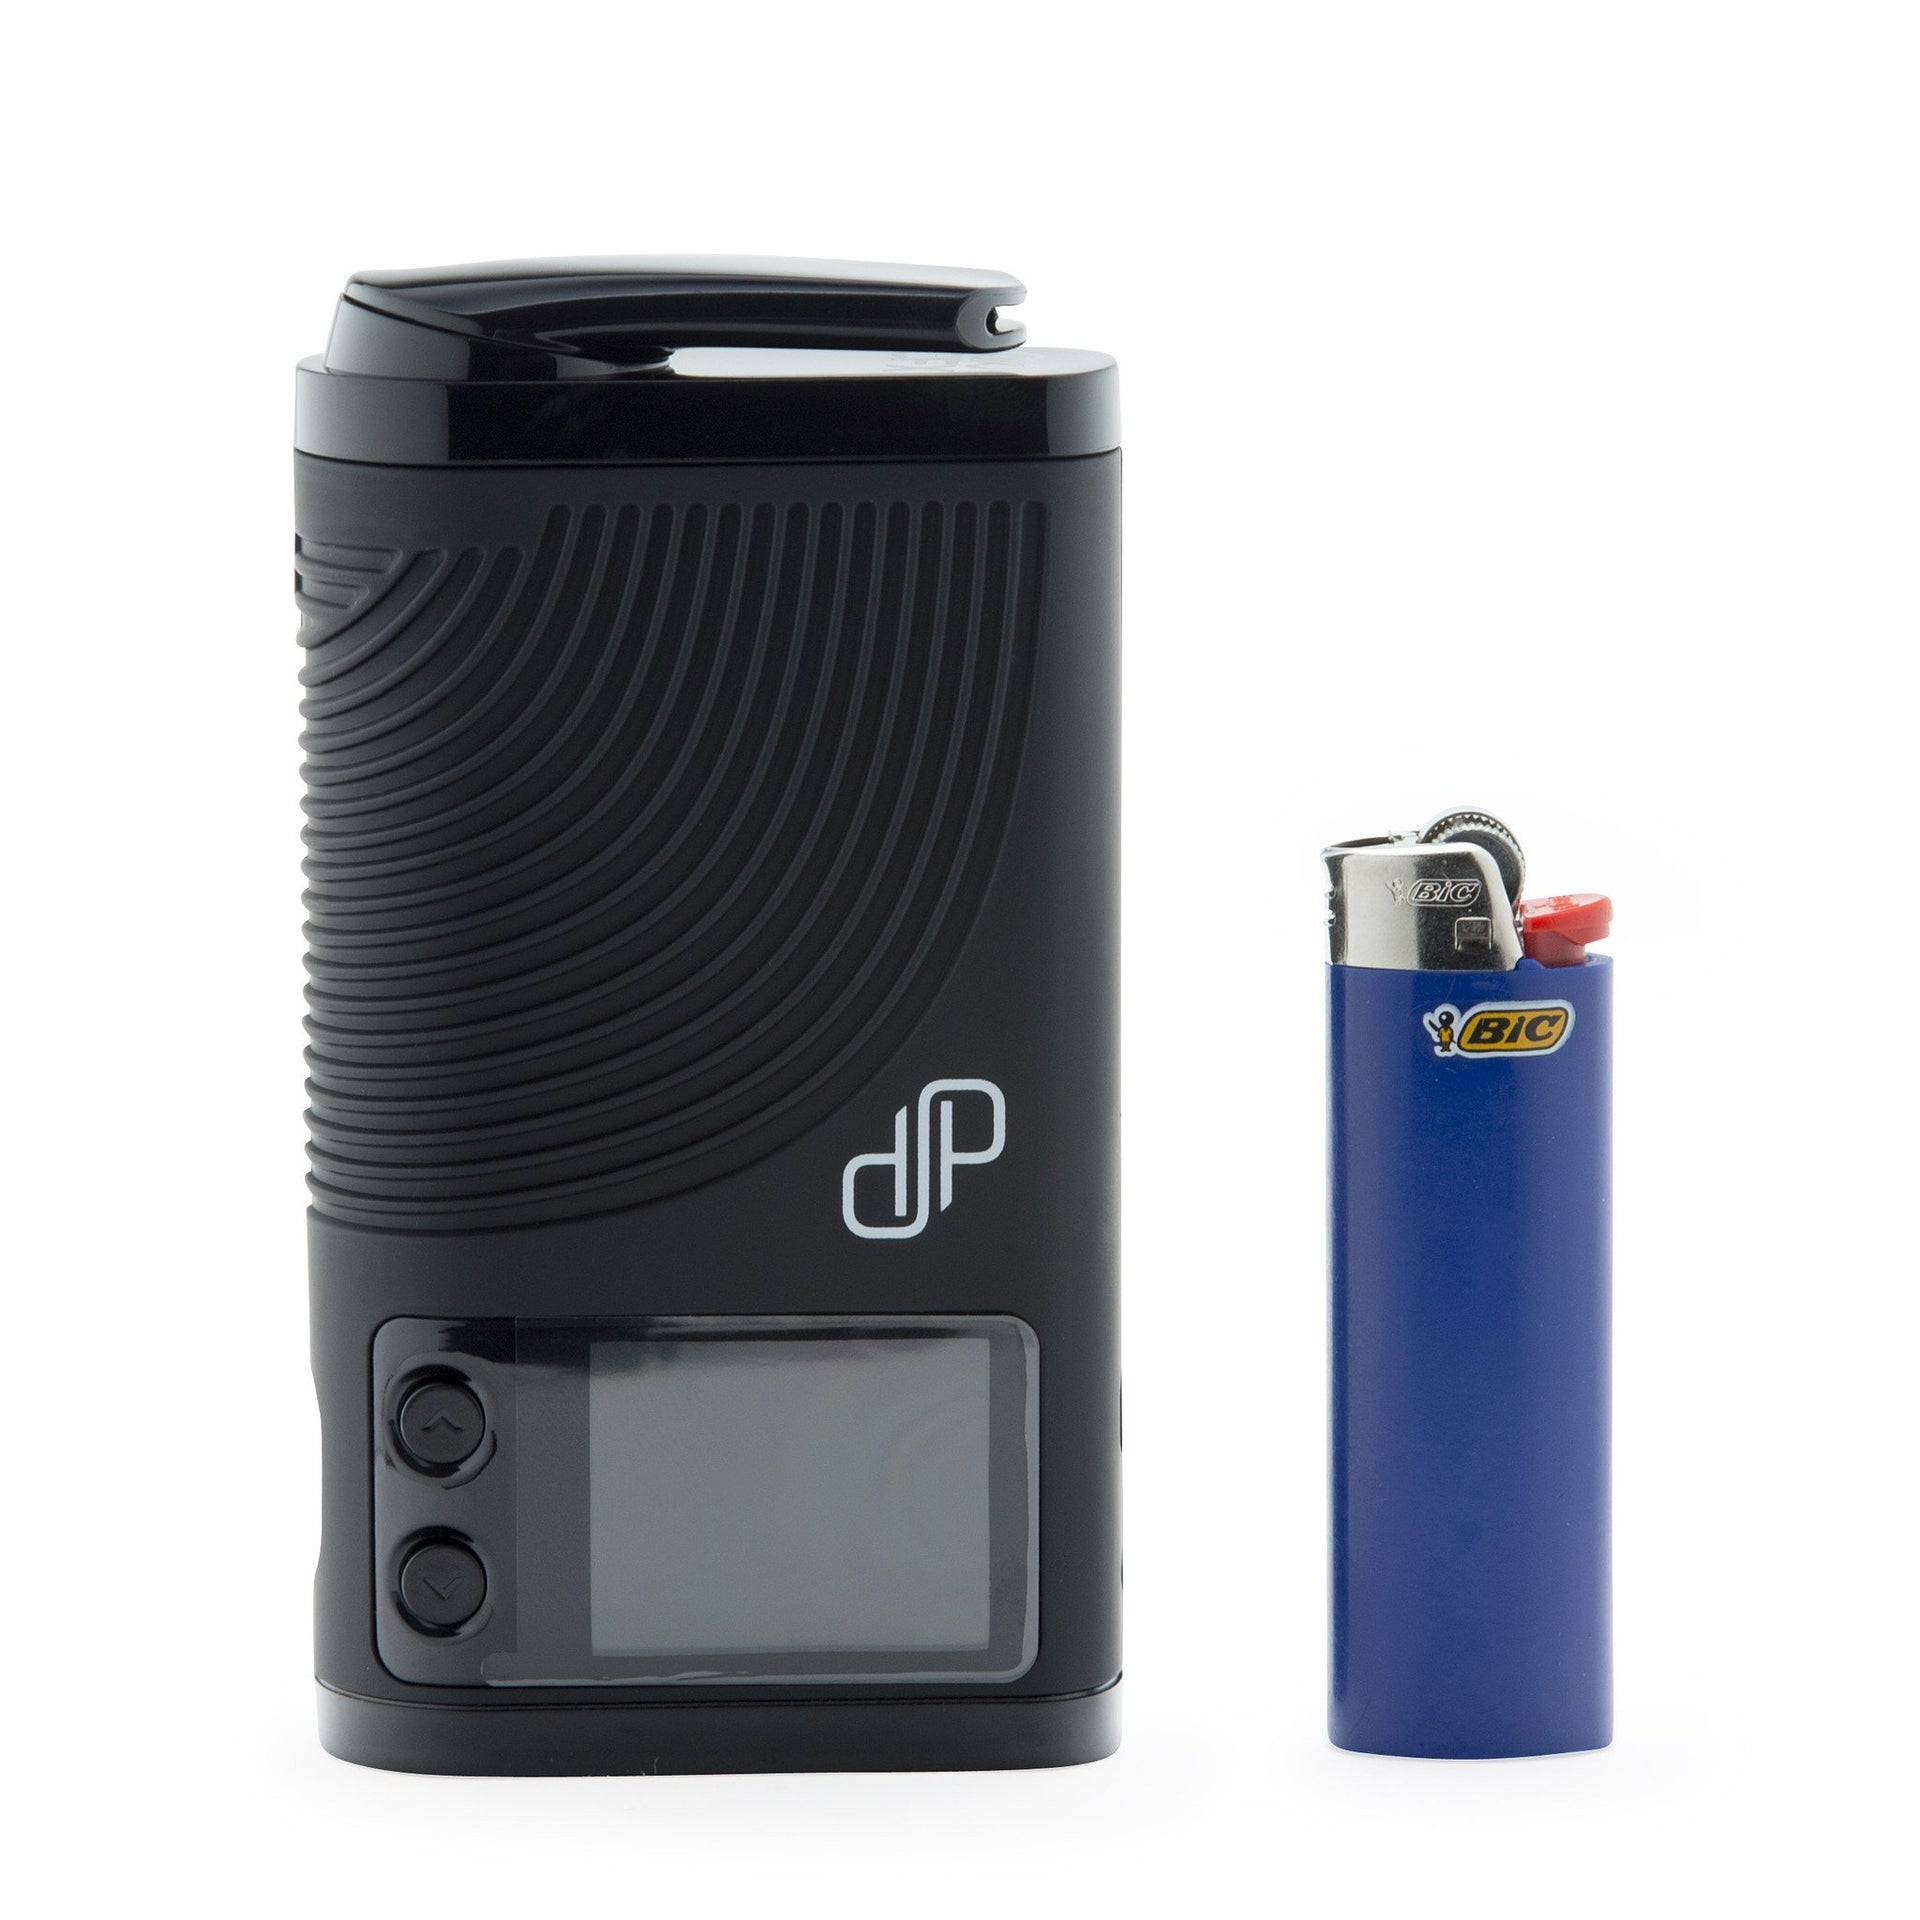 Boundless CFX Vaporizer - 420 Science - The most trusted online smoke shop.